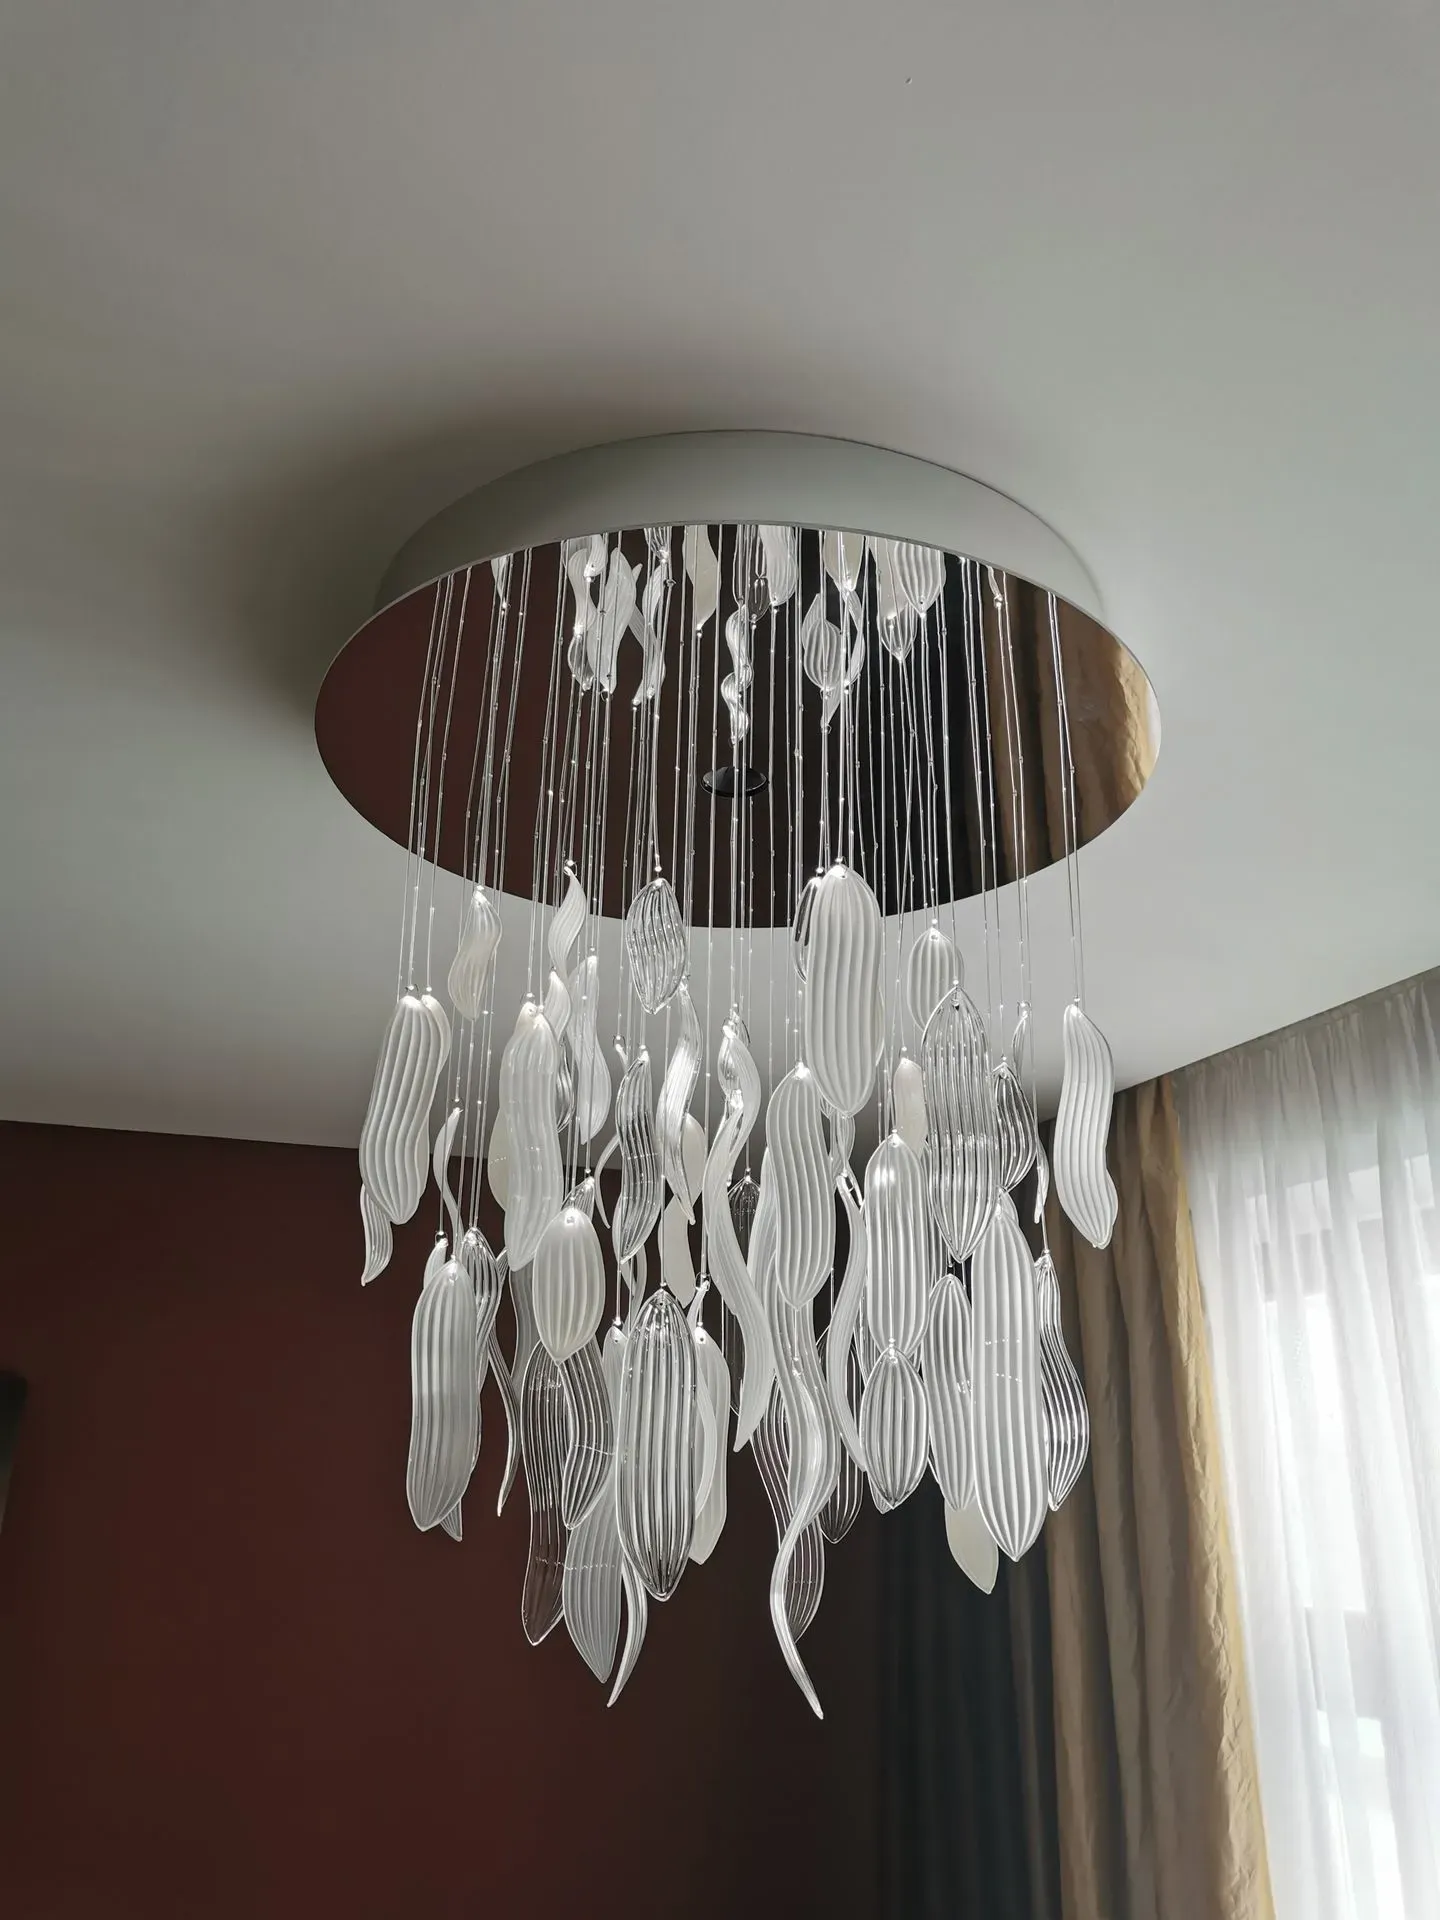 ASTER modern fibre optic decorative chandelier with glass leaves and downlights round shape off